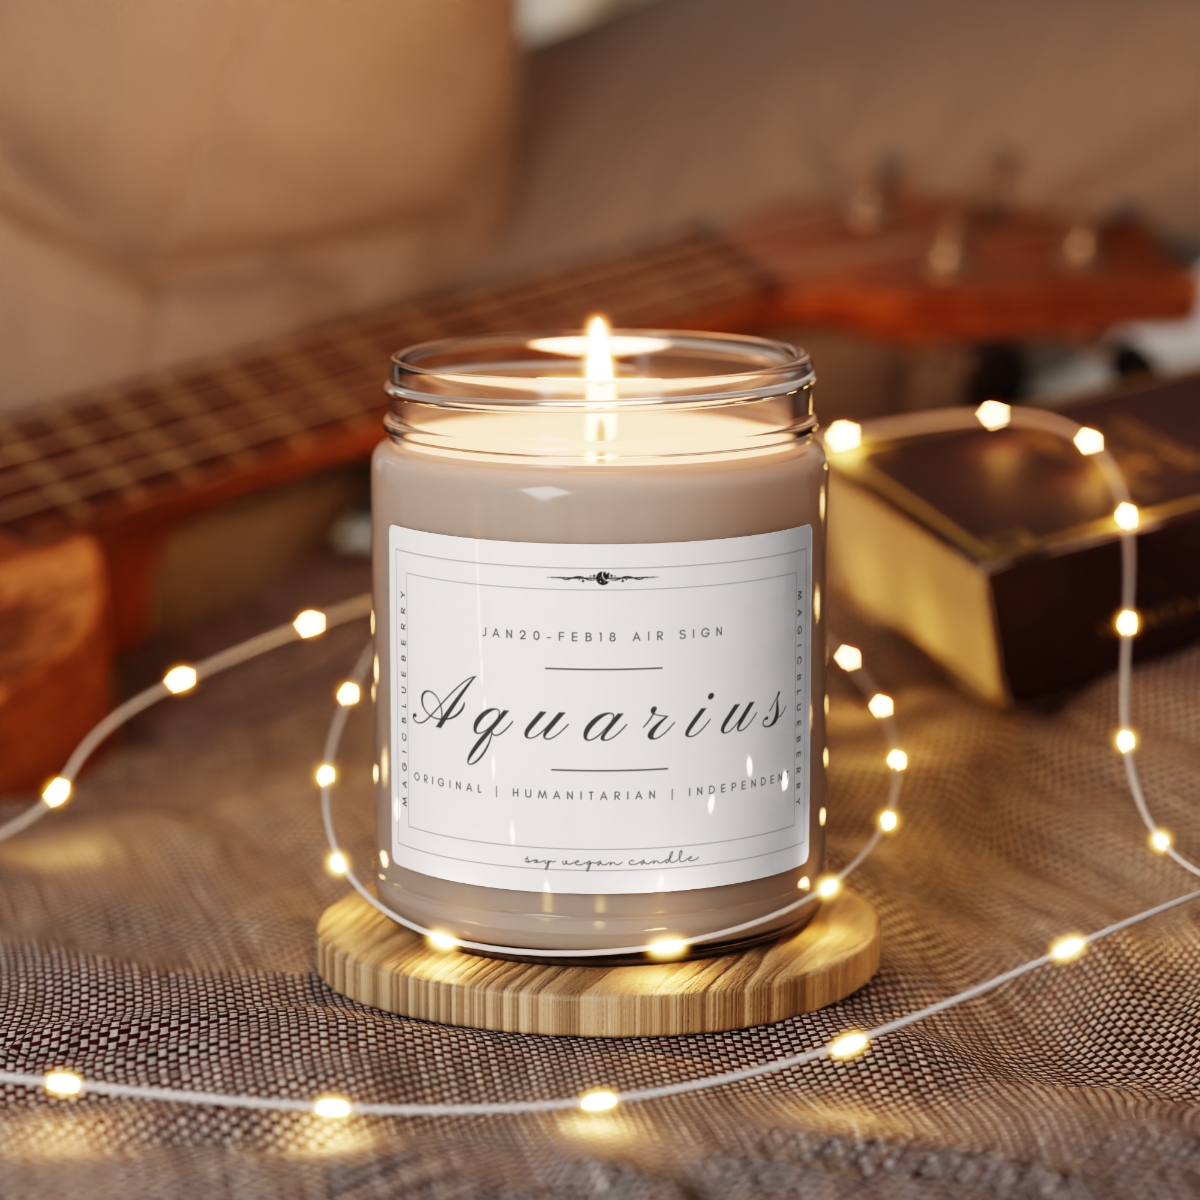 Aquarius - Scented Vegan Soy Wax Candle Clear Jar Candle, Spell Candle, Sassy Candle Vegan Candle Cotton Wick Candle Home Deco product main image